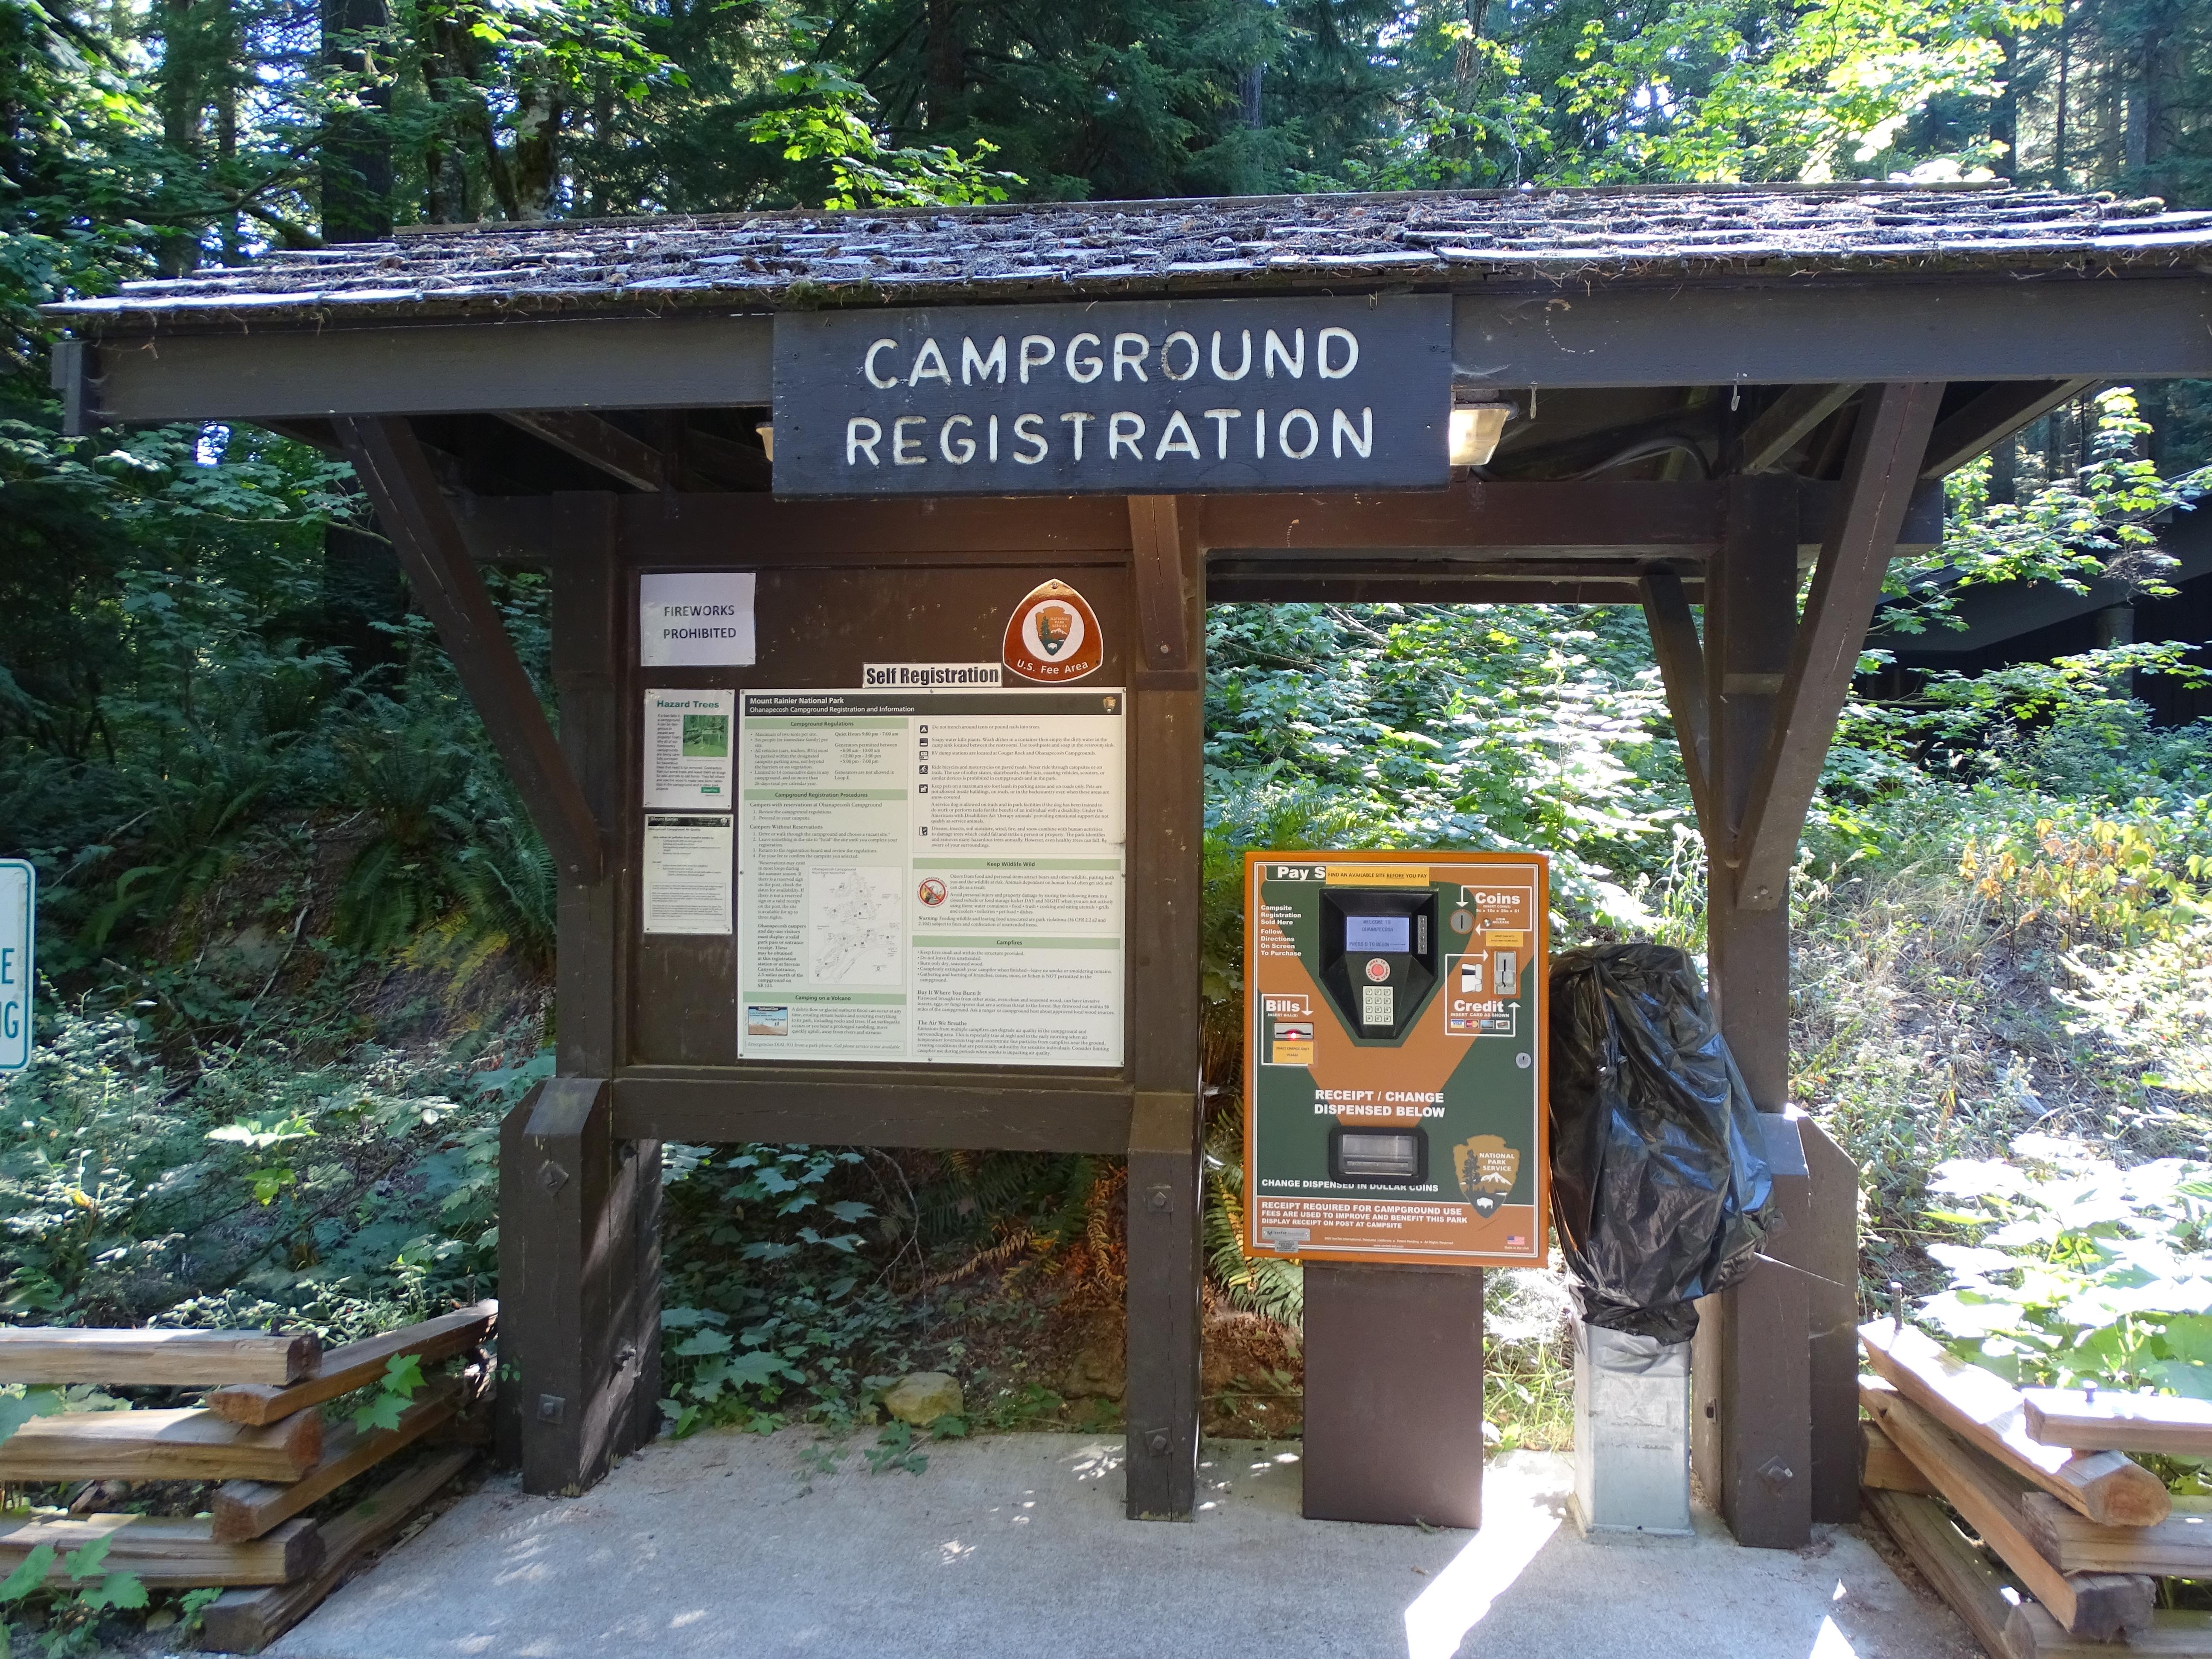 A brown bulletin board with information about the campground and a machine for paying the fee.